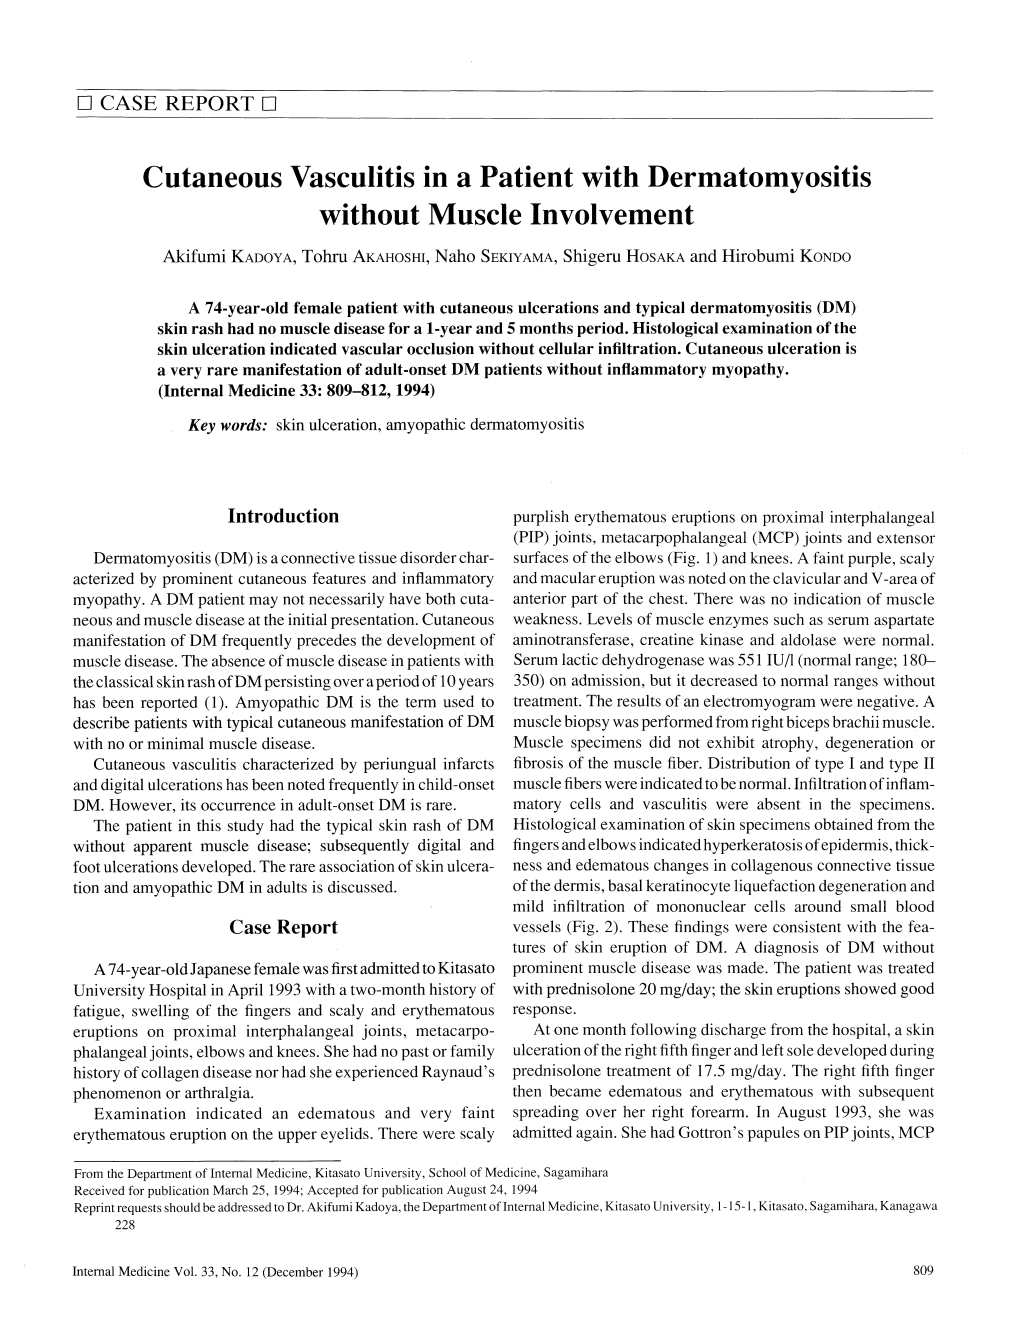 Cutaneousvasculitis in a Patient with Dermatomyositis Ithout Muscle Involvement